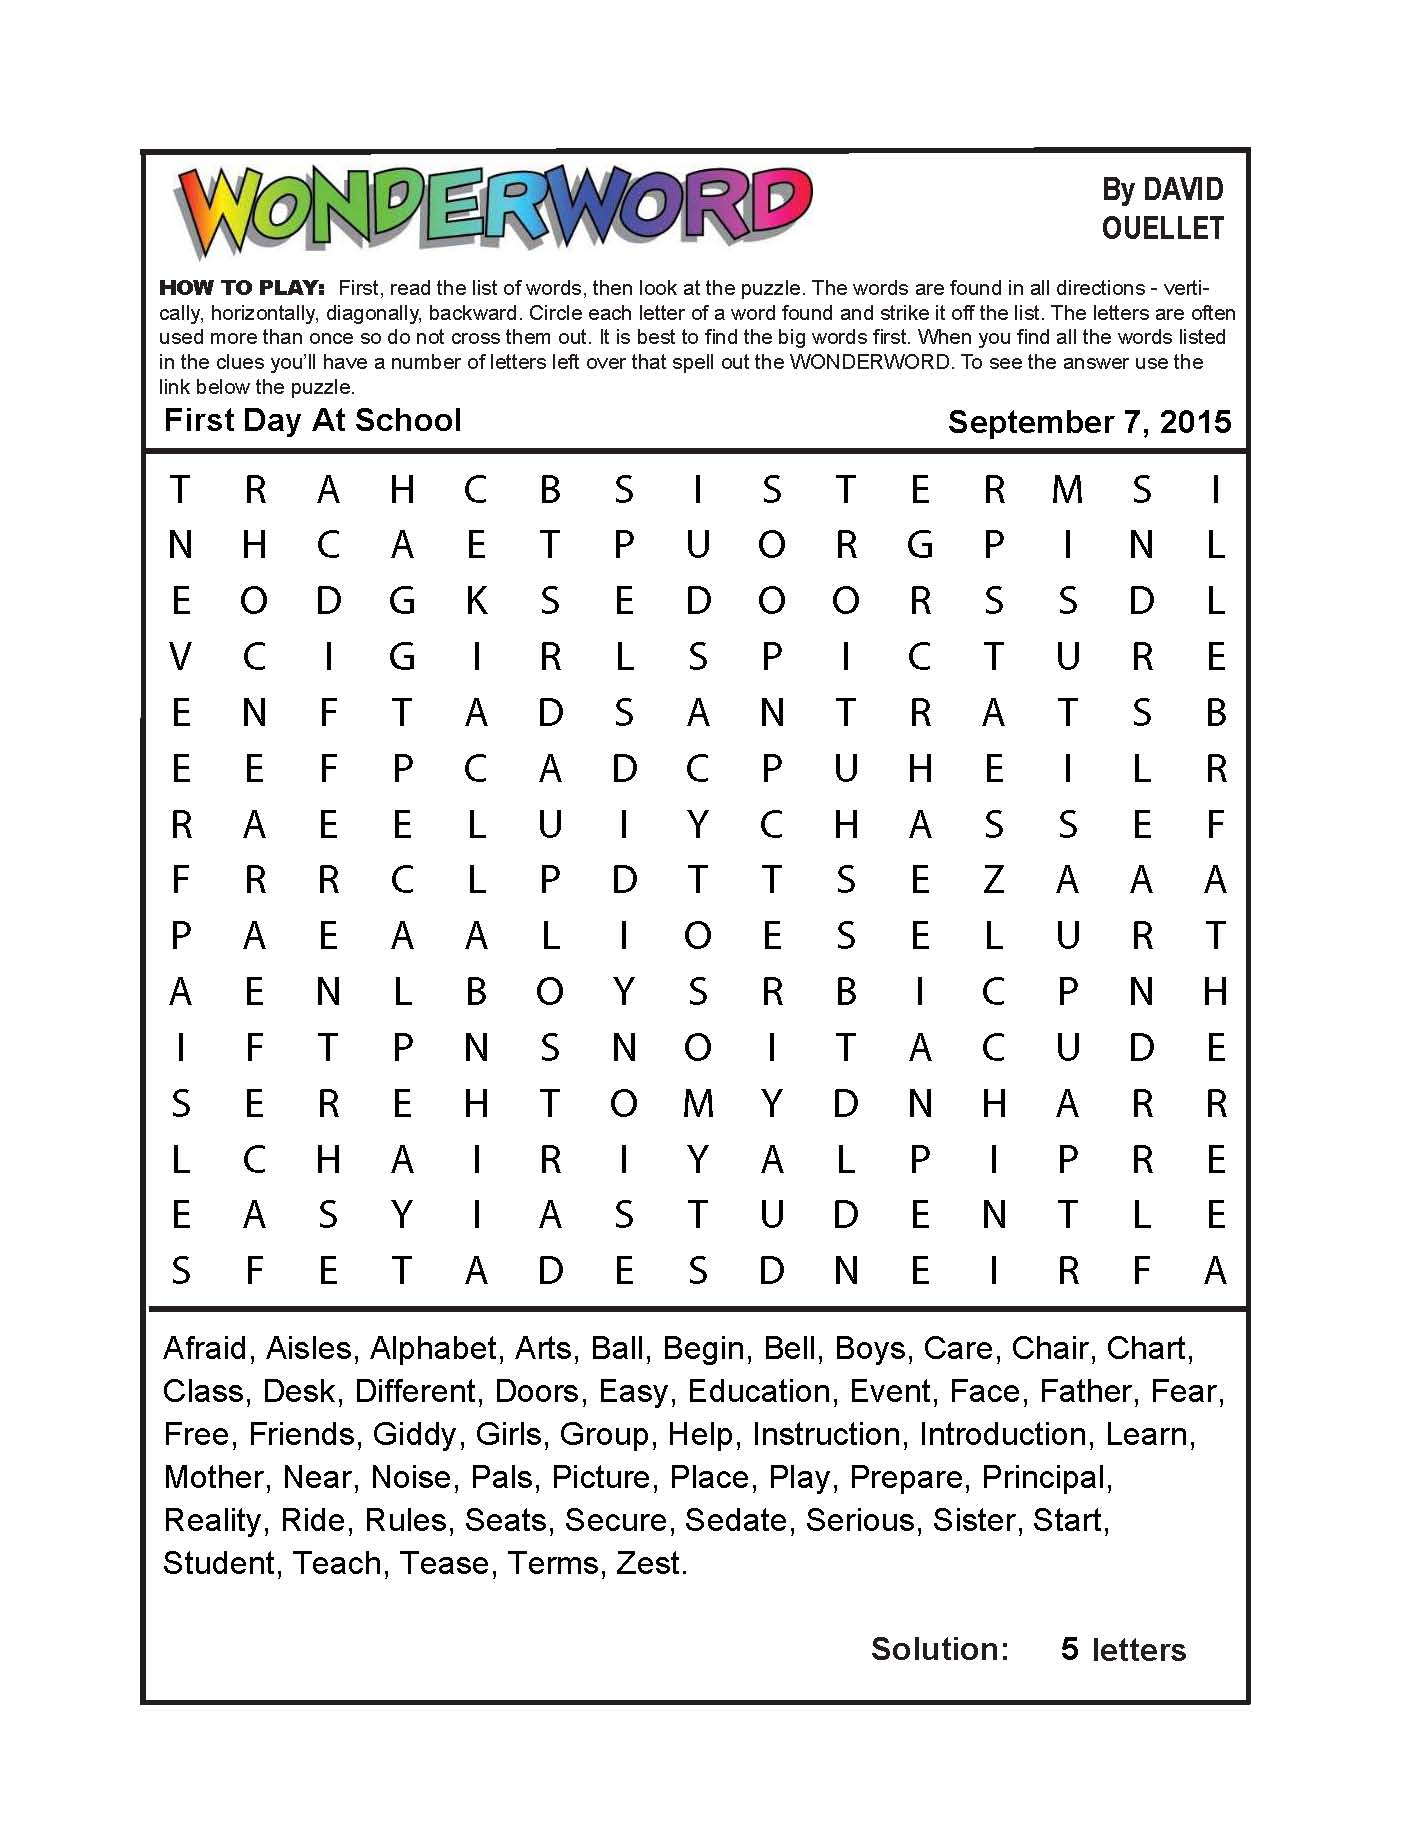 First Day At School - Printable Wonderword Puzzles